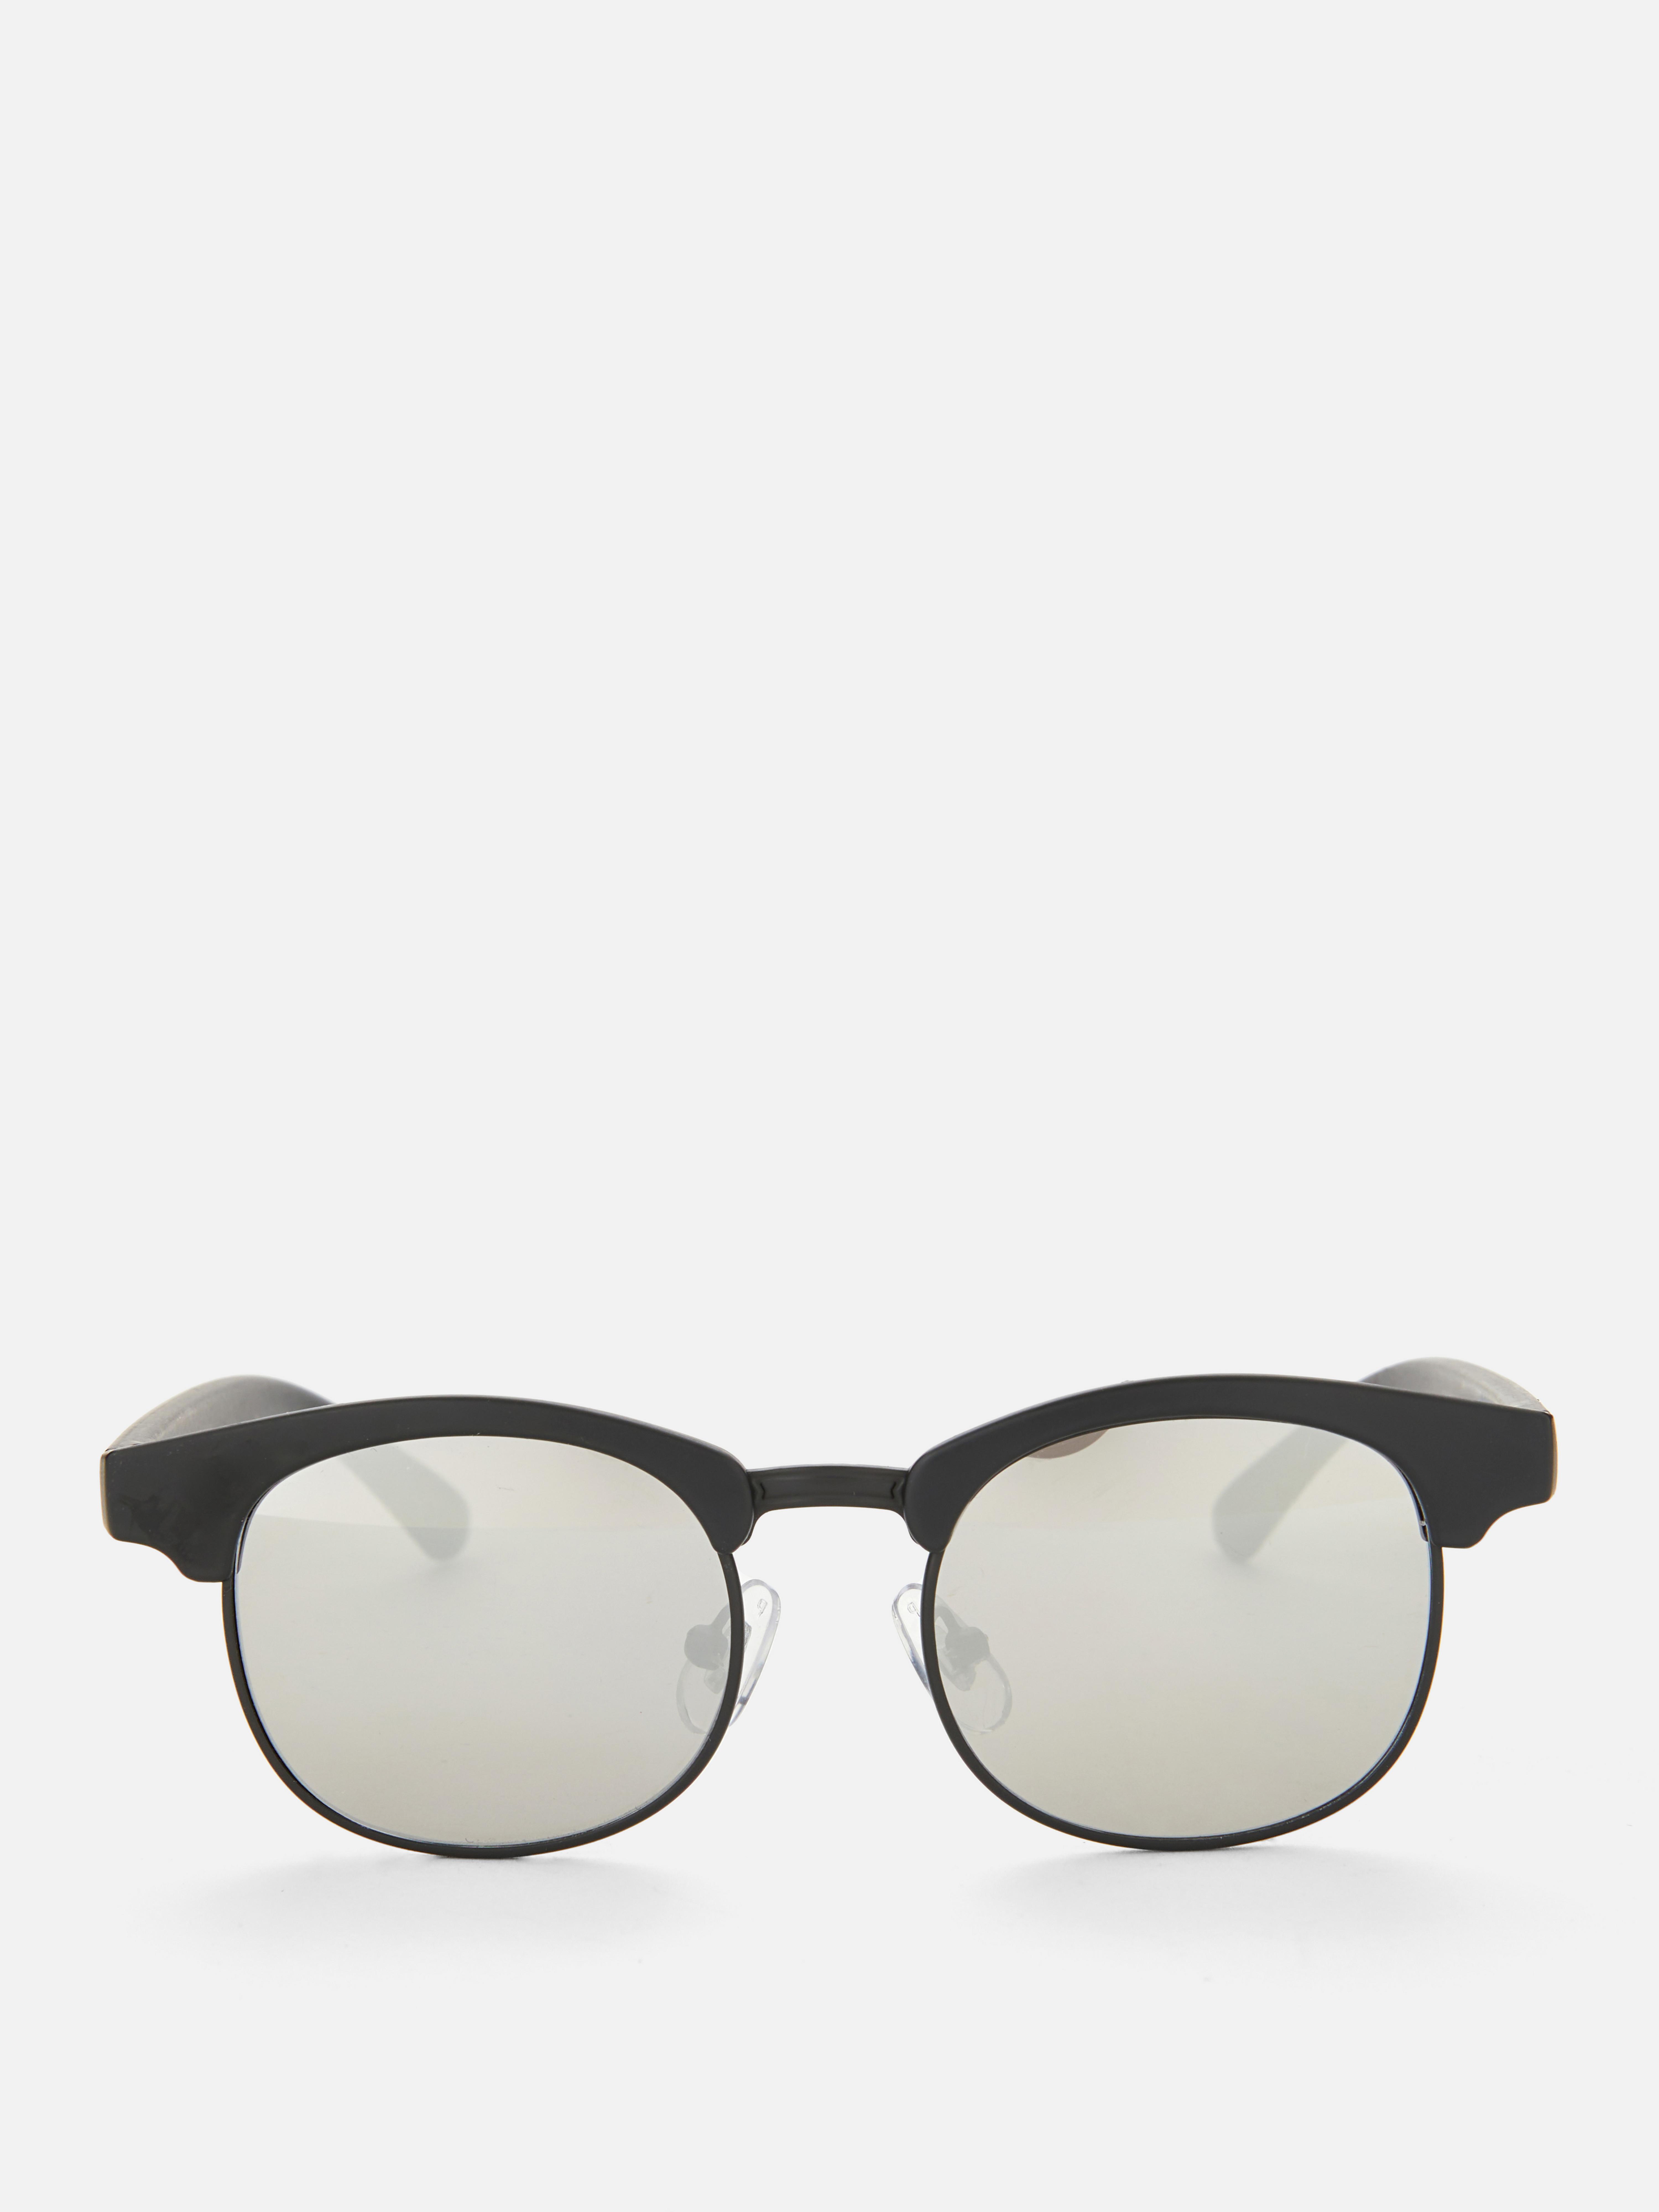 Clubmaster Style Sunglasses